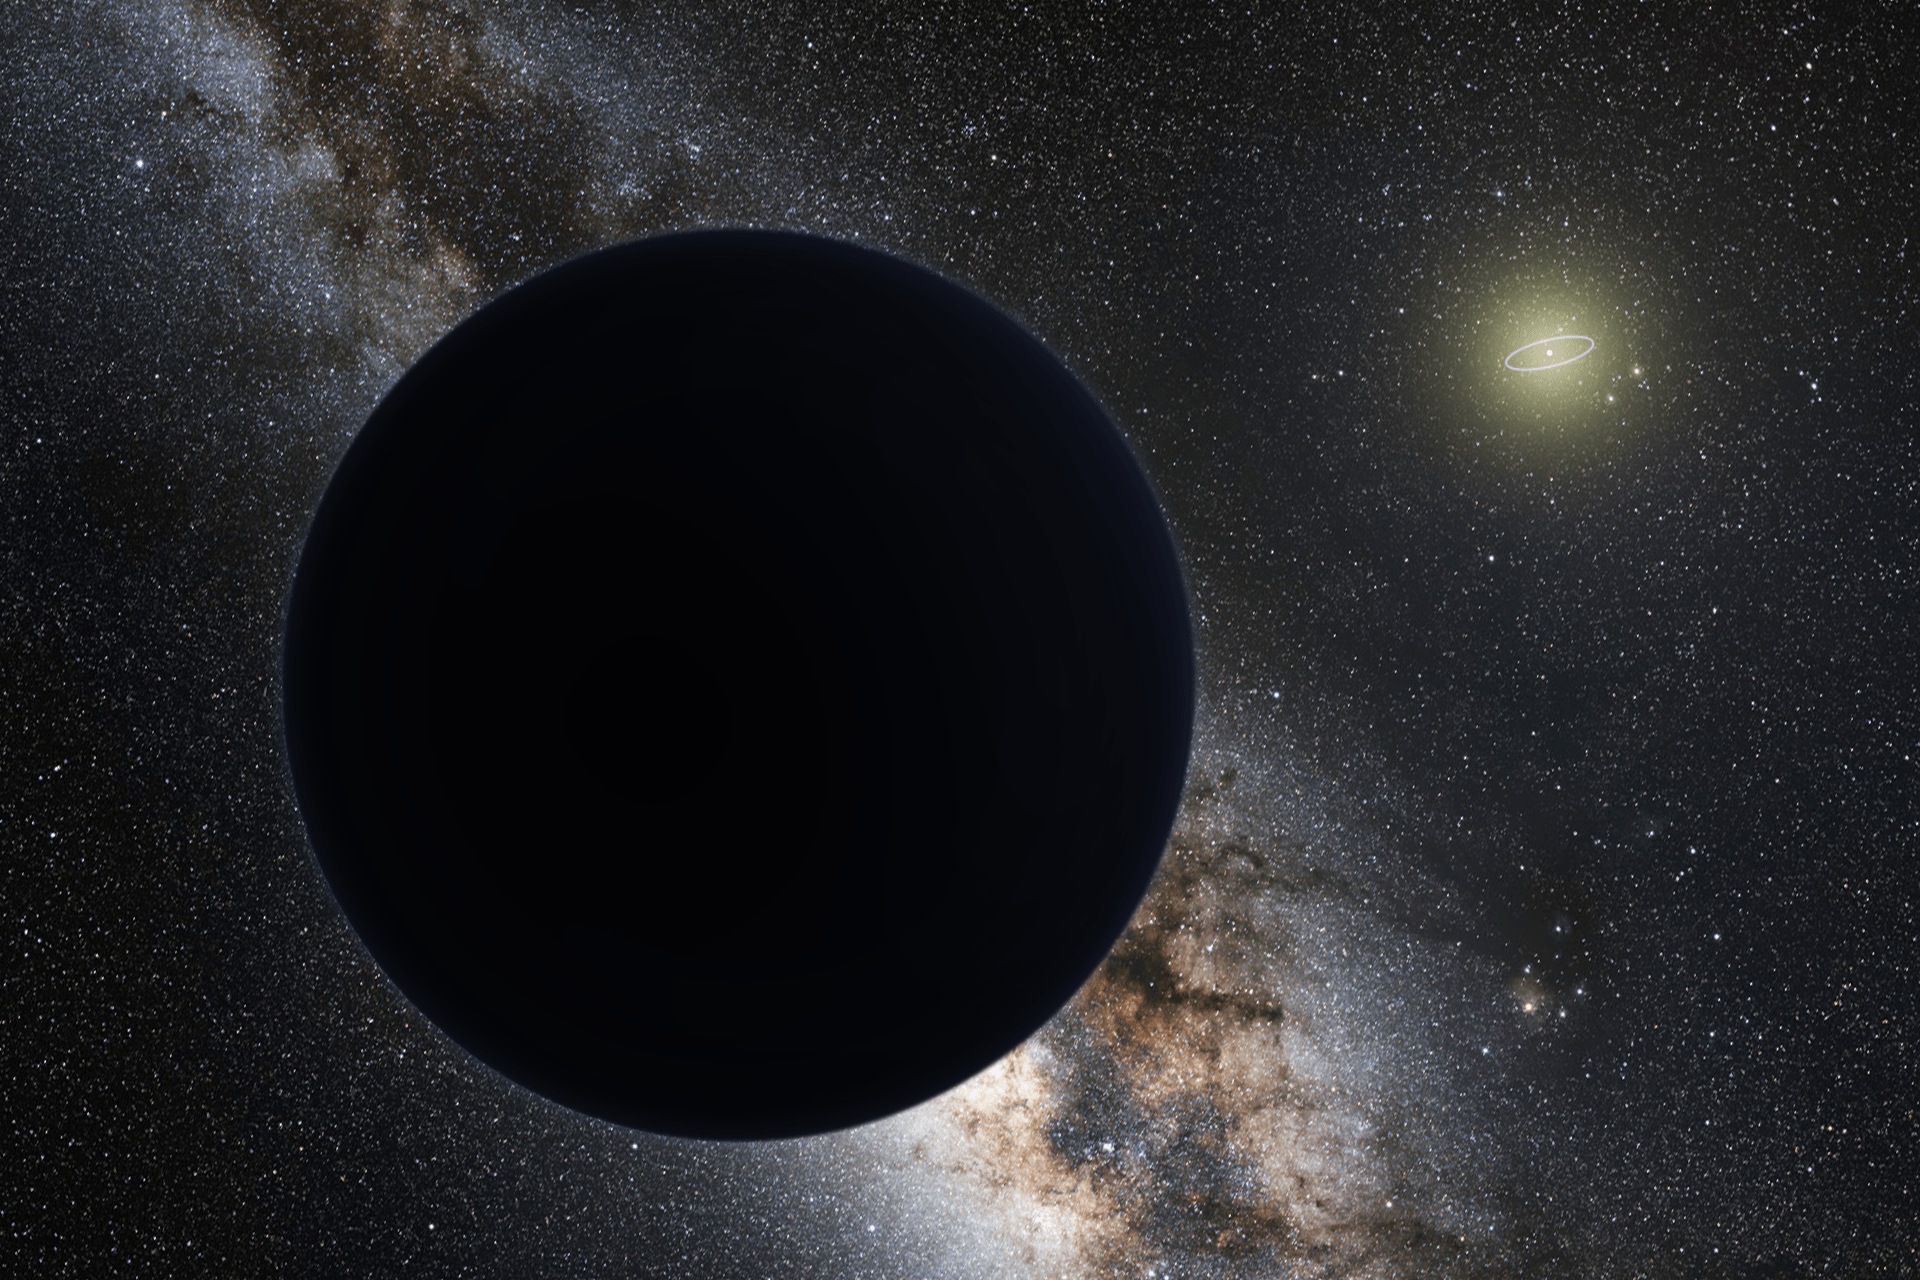 Artist's impression of a hypothetical Planet Nine